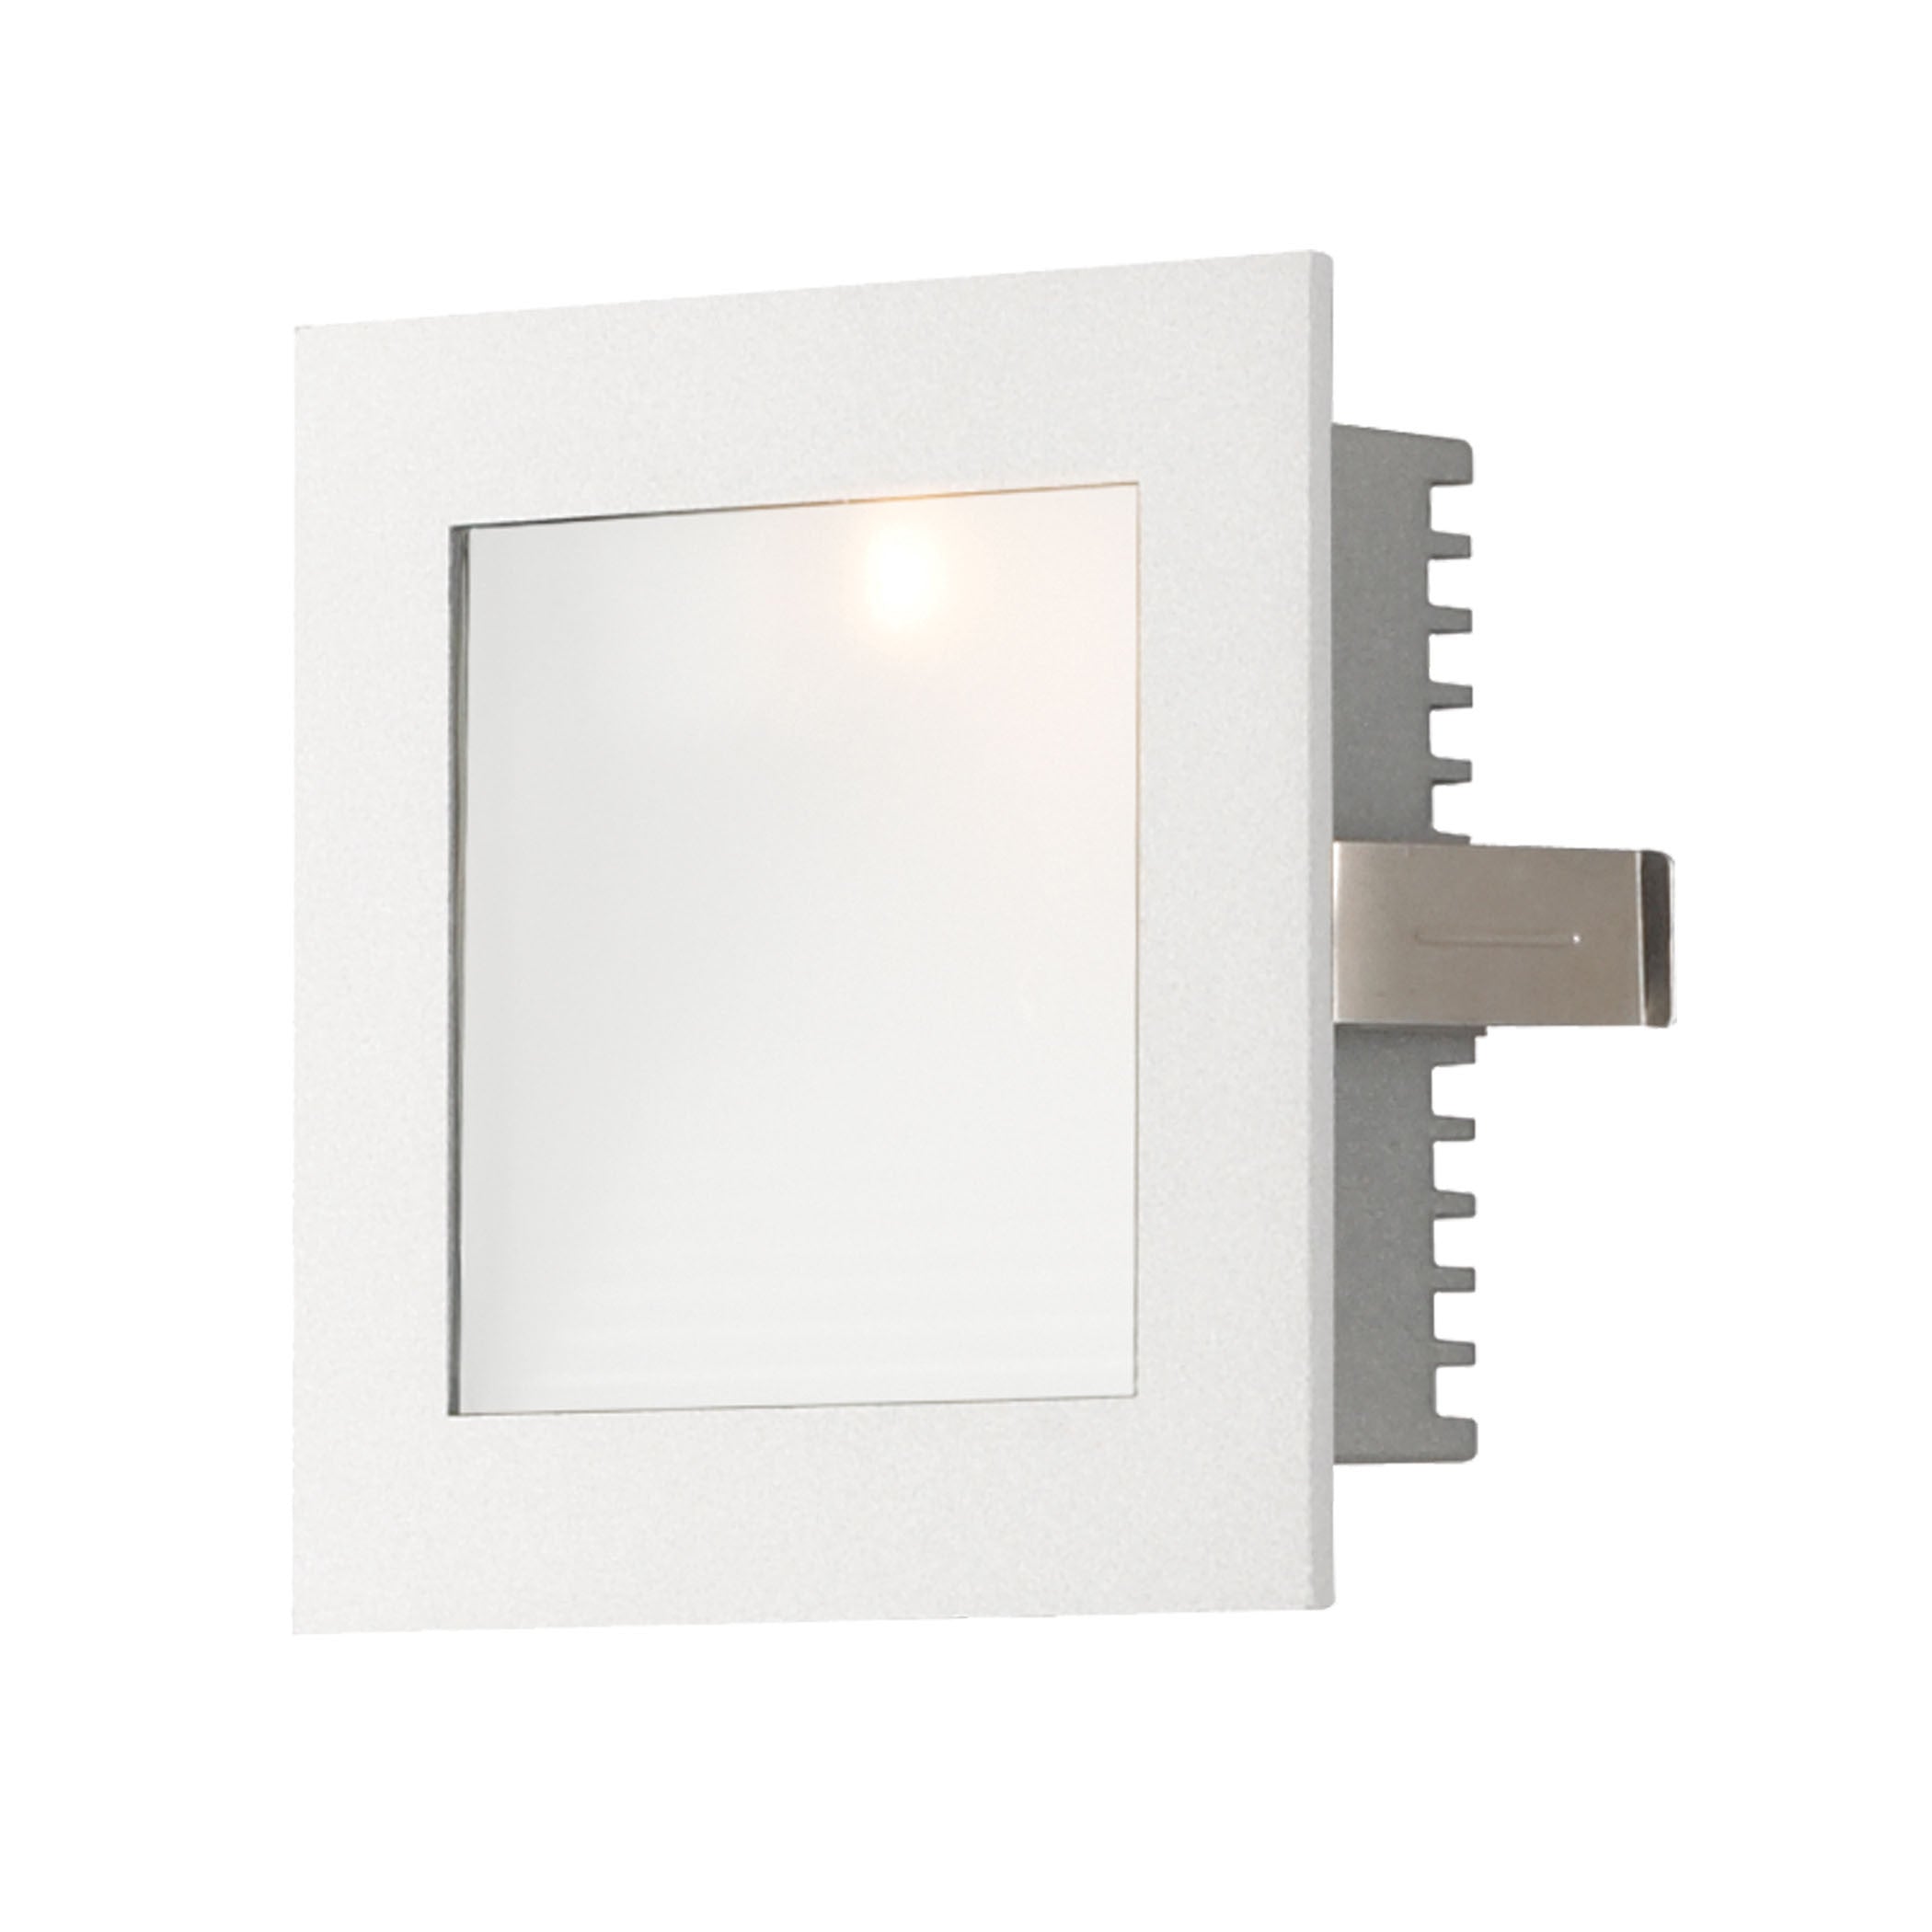 Alico Wle-101w Steplight Led Collection Opal,white Finish Steplight